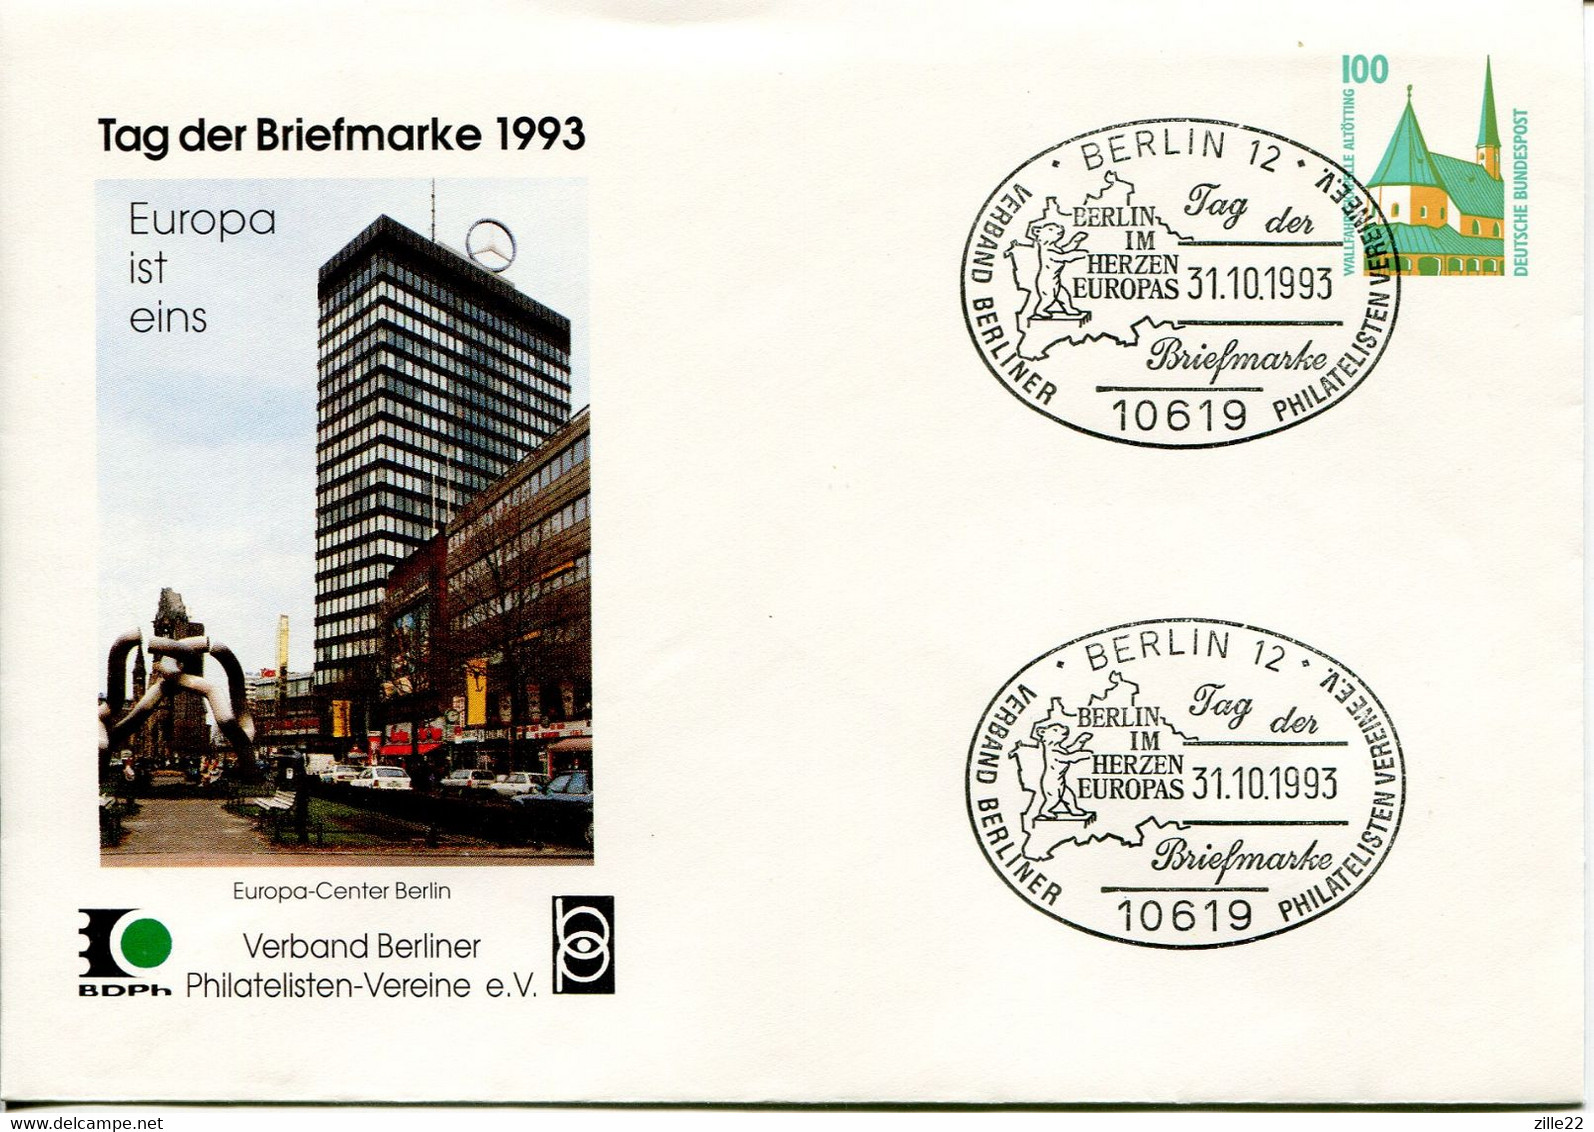 Germany Deutschland Postal Stationery - Cover - Altötting Design - Stamp Club Anniversary, Berlin - Private Covers - Used